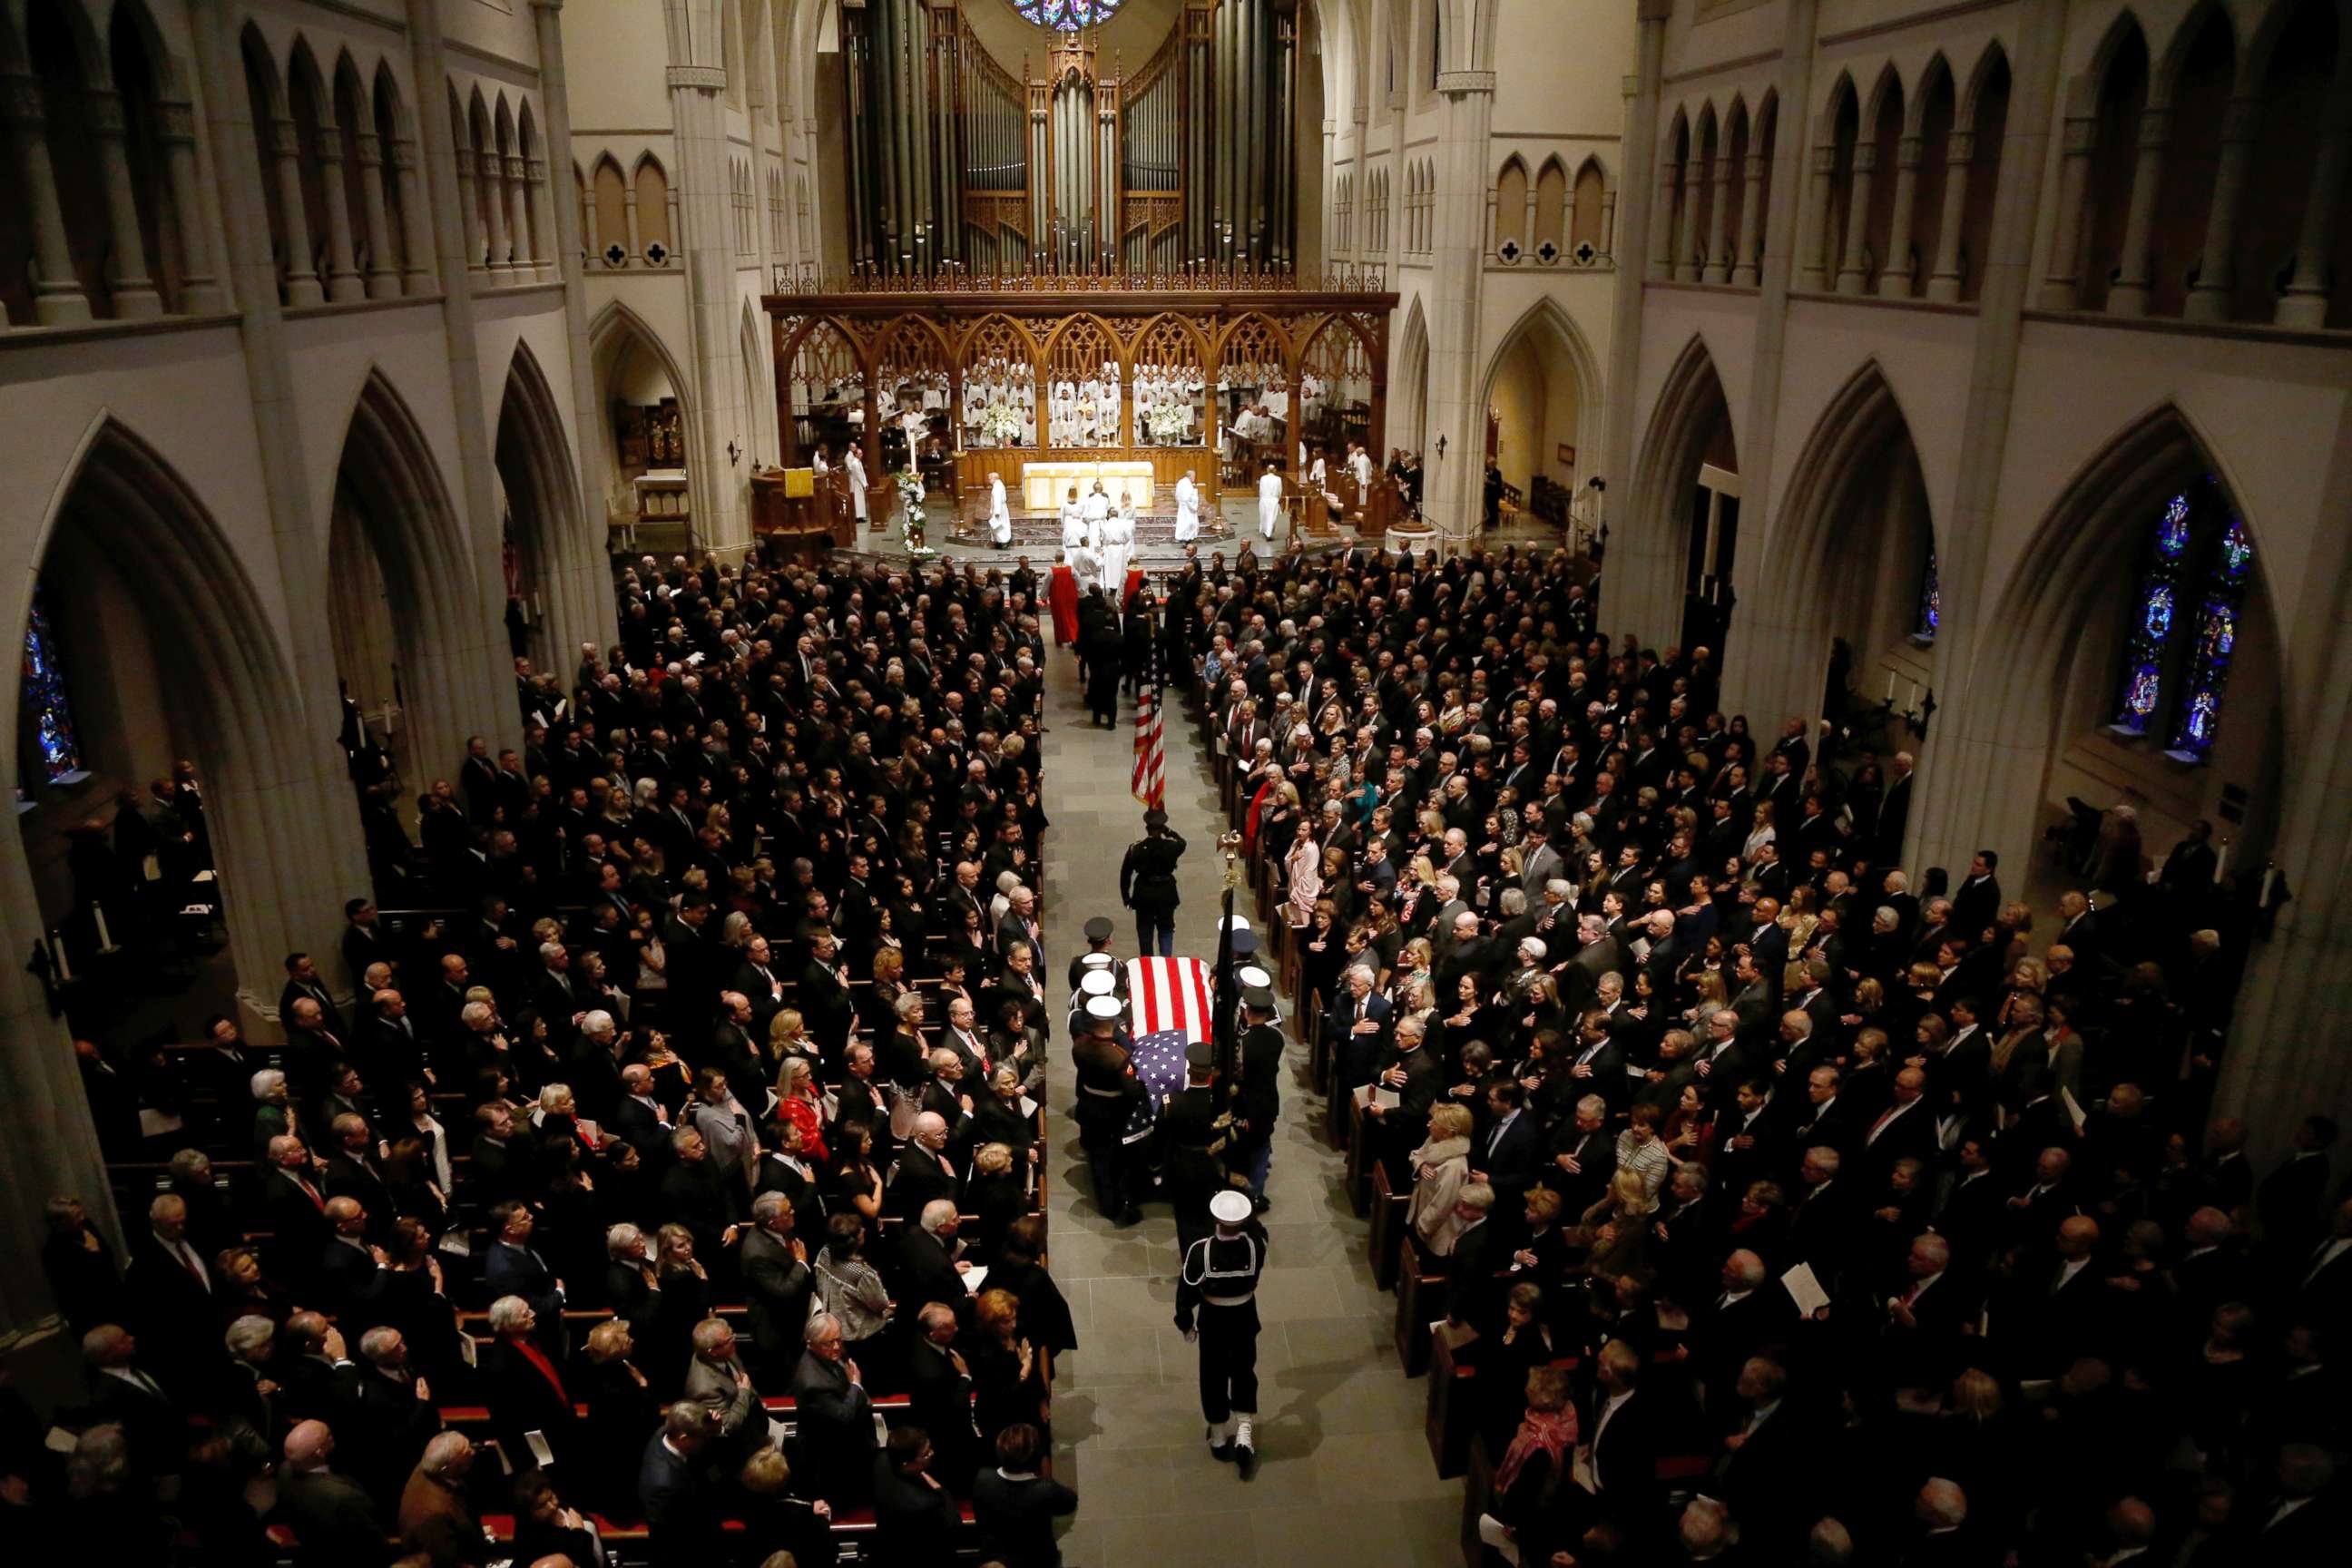 PHOTO: The flag-draped casket of former President George H.W. Bush is carried by a joint services military honor guard into St. Martin's Episcopal Church, Dec. 6, 2018, in Houston.